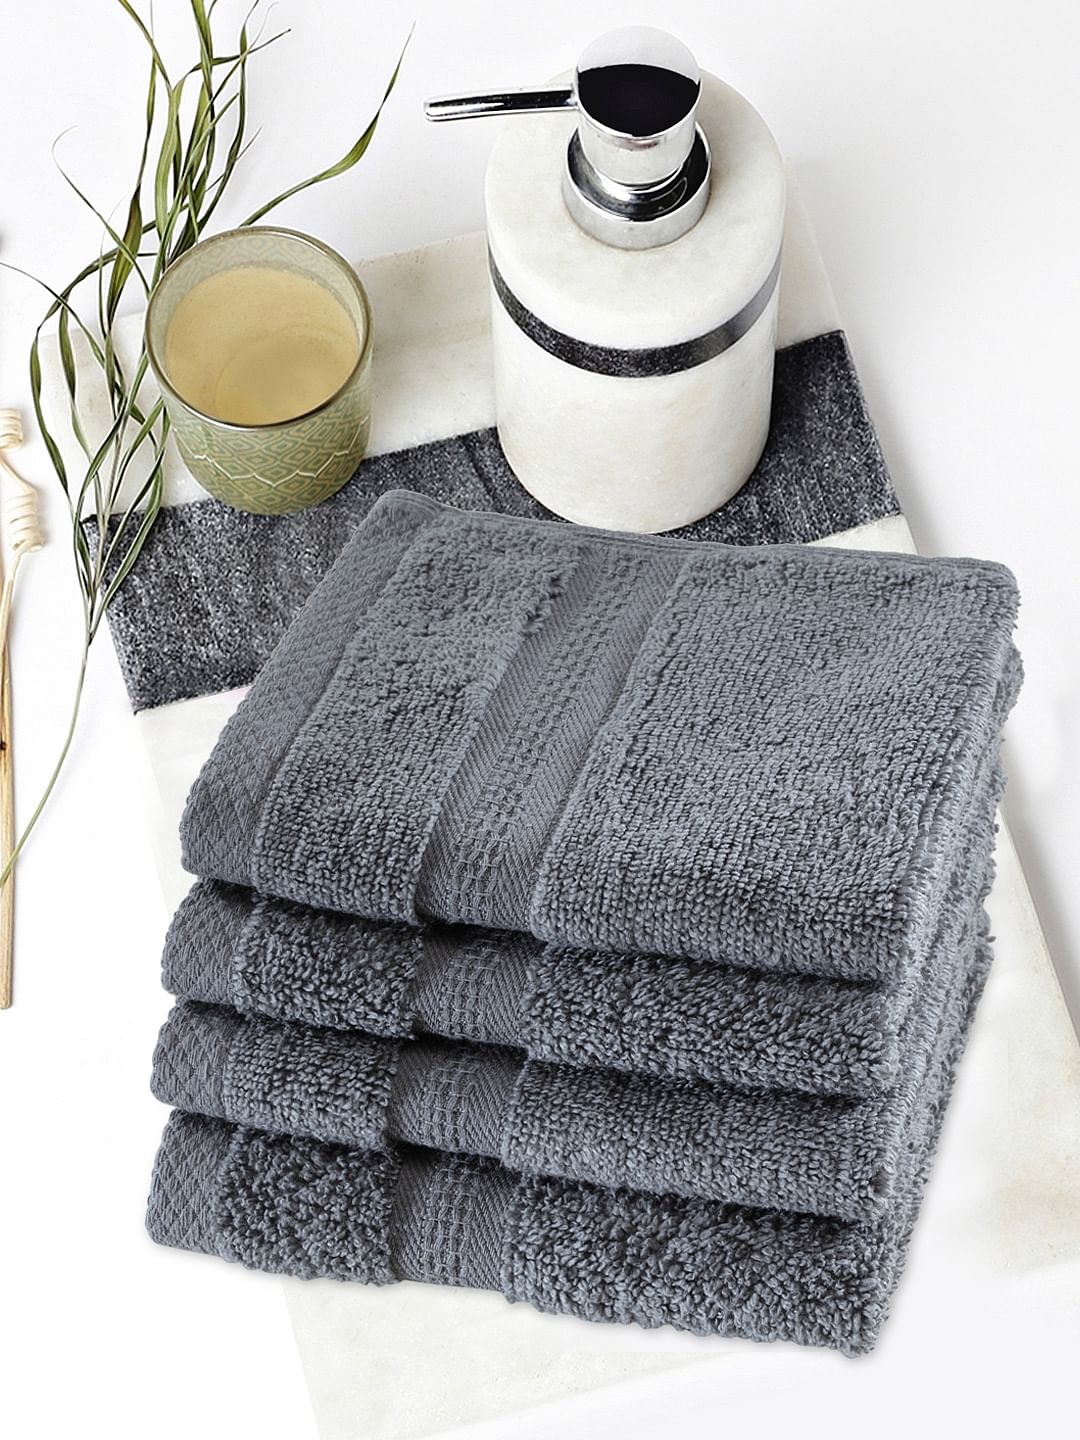 Paradiso Cotton Set Of 4 Face Towel 30X30 Cm 500 Gsm in Grey Colour